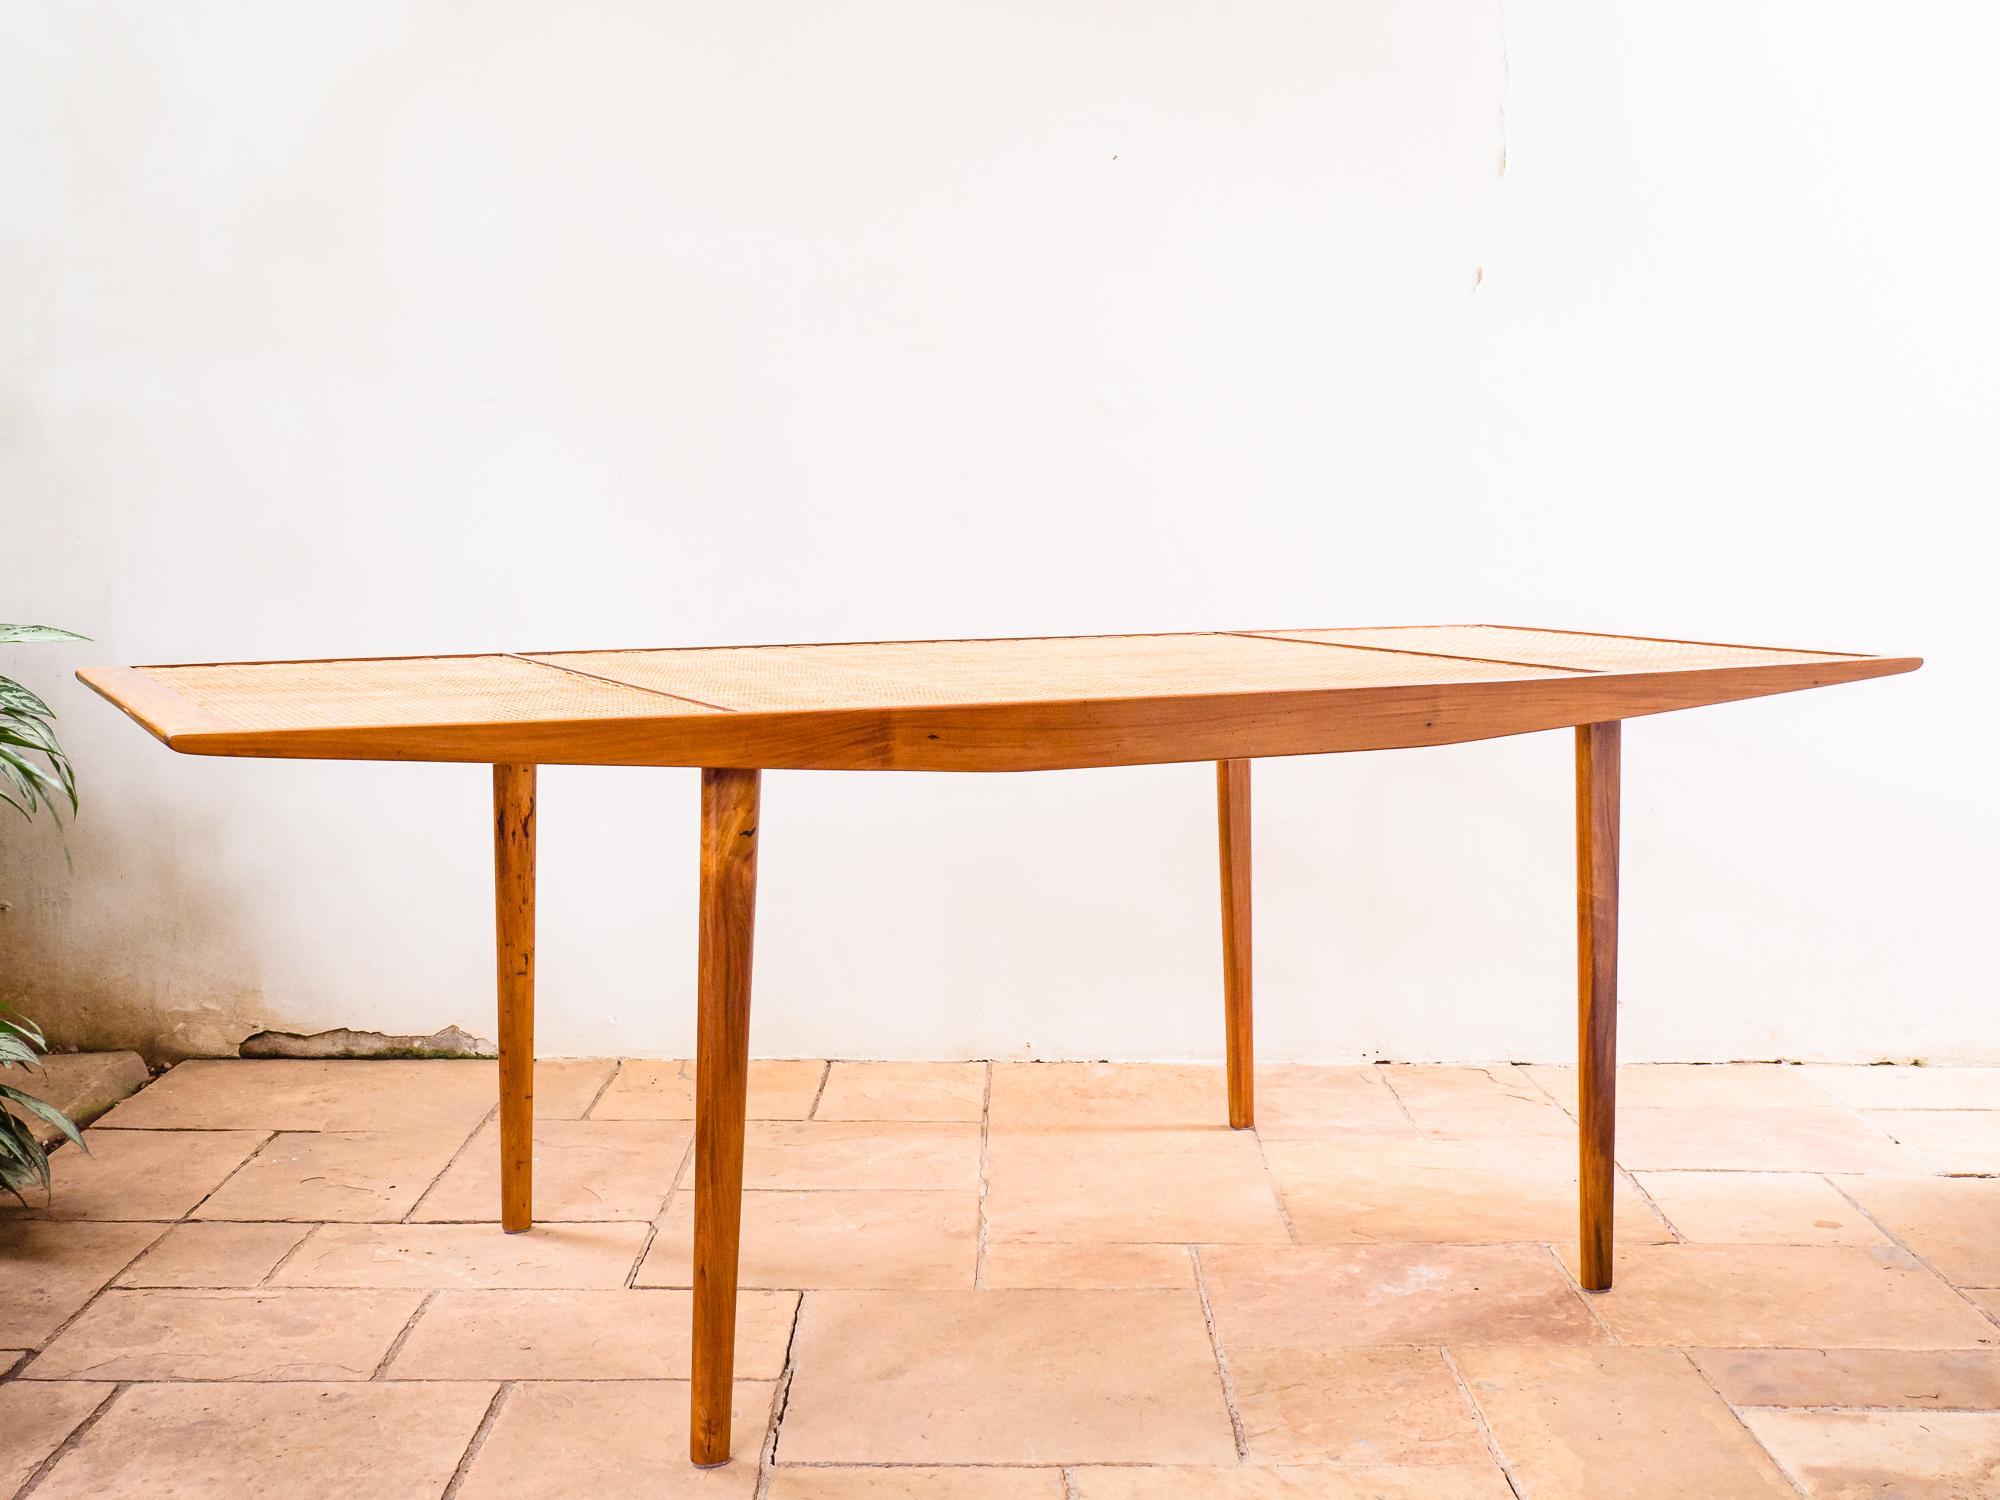 Brazilian Dining Table in Caviuna and Cane Weaving by Martin Eisler, Brazil Modern, 1950s For Sale